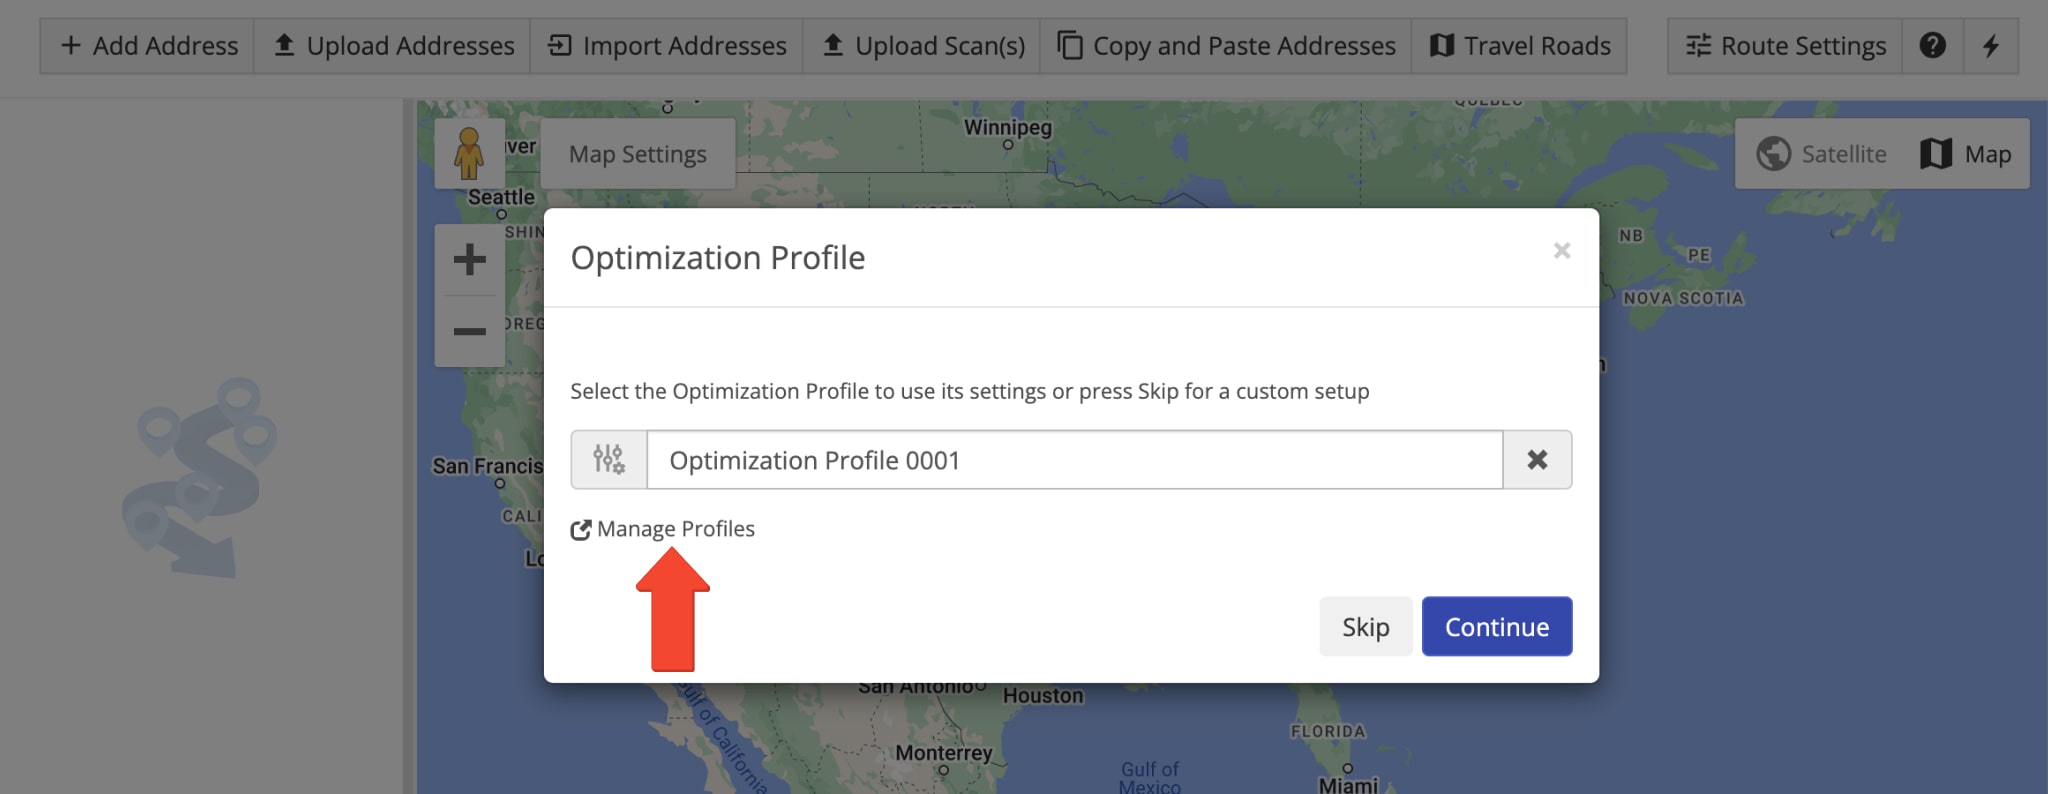 Open Optimization Profiles before adding addresses when planning routes with Constraints.